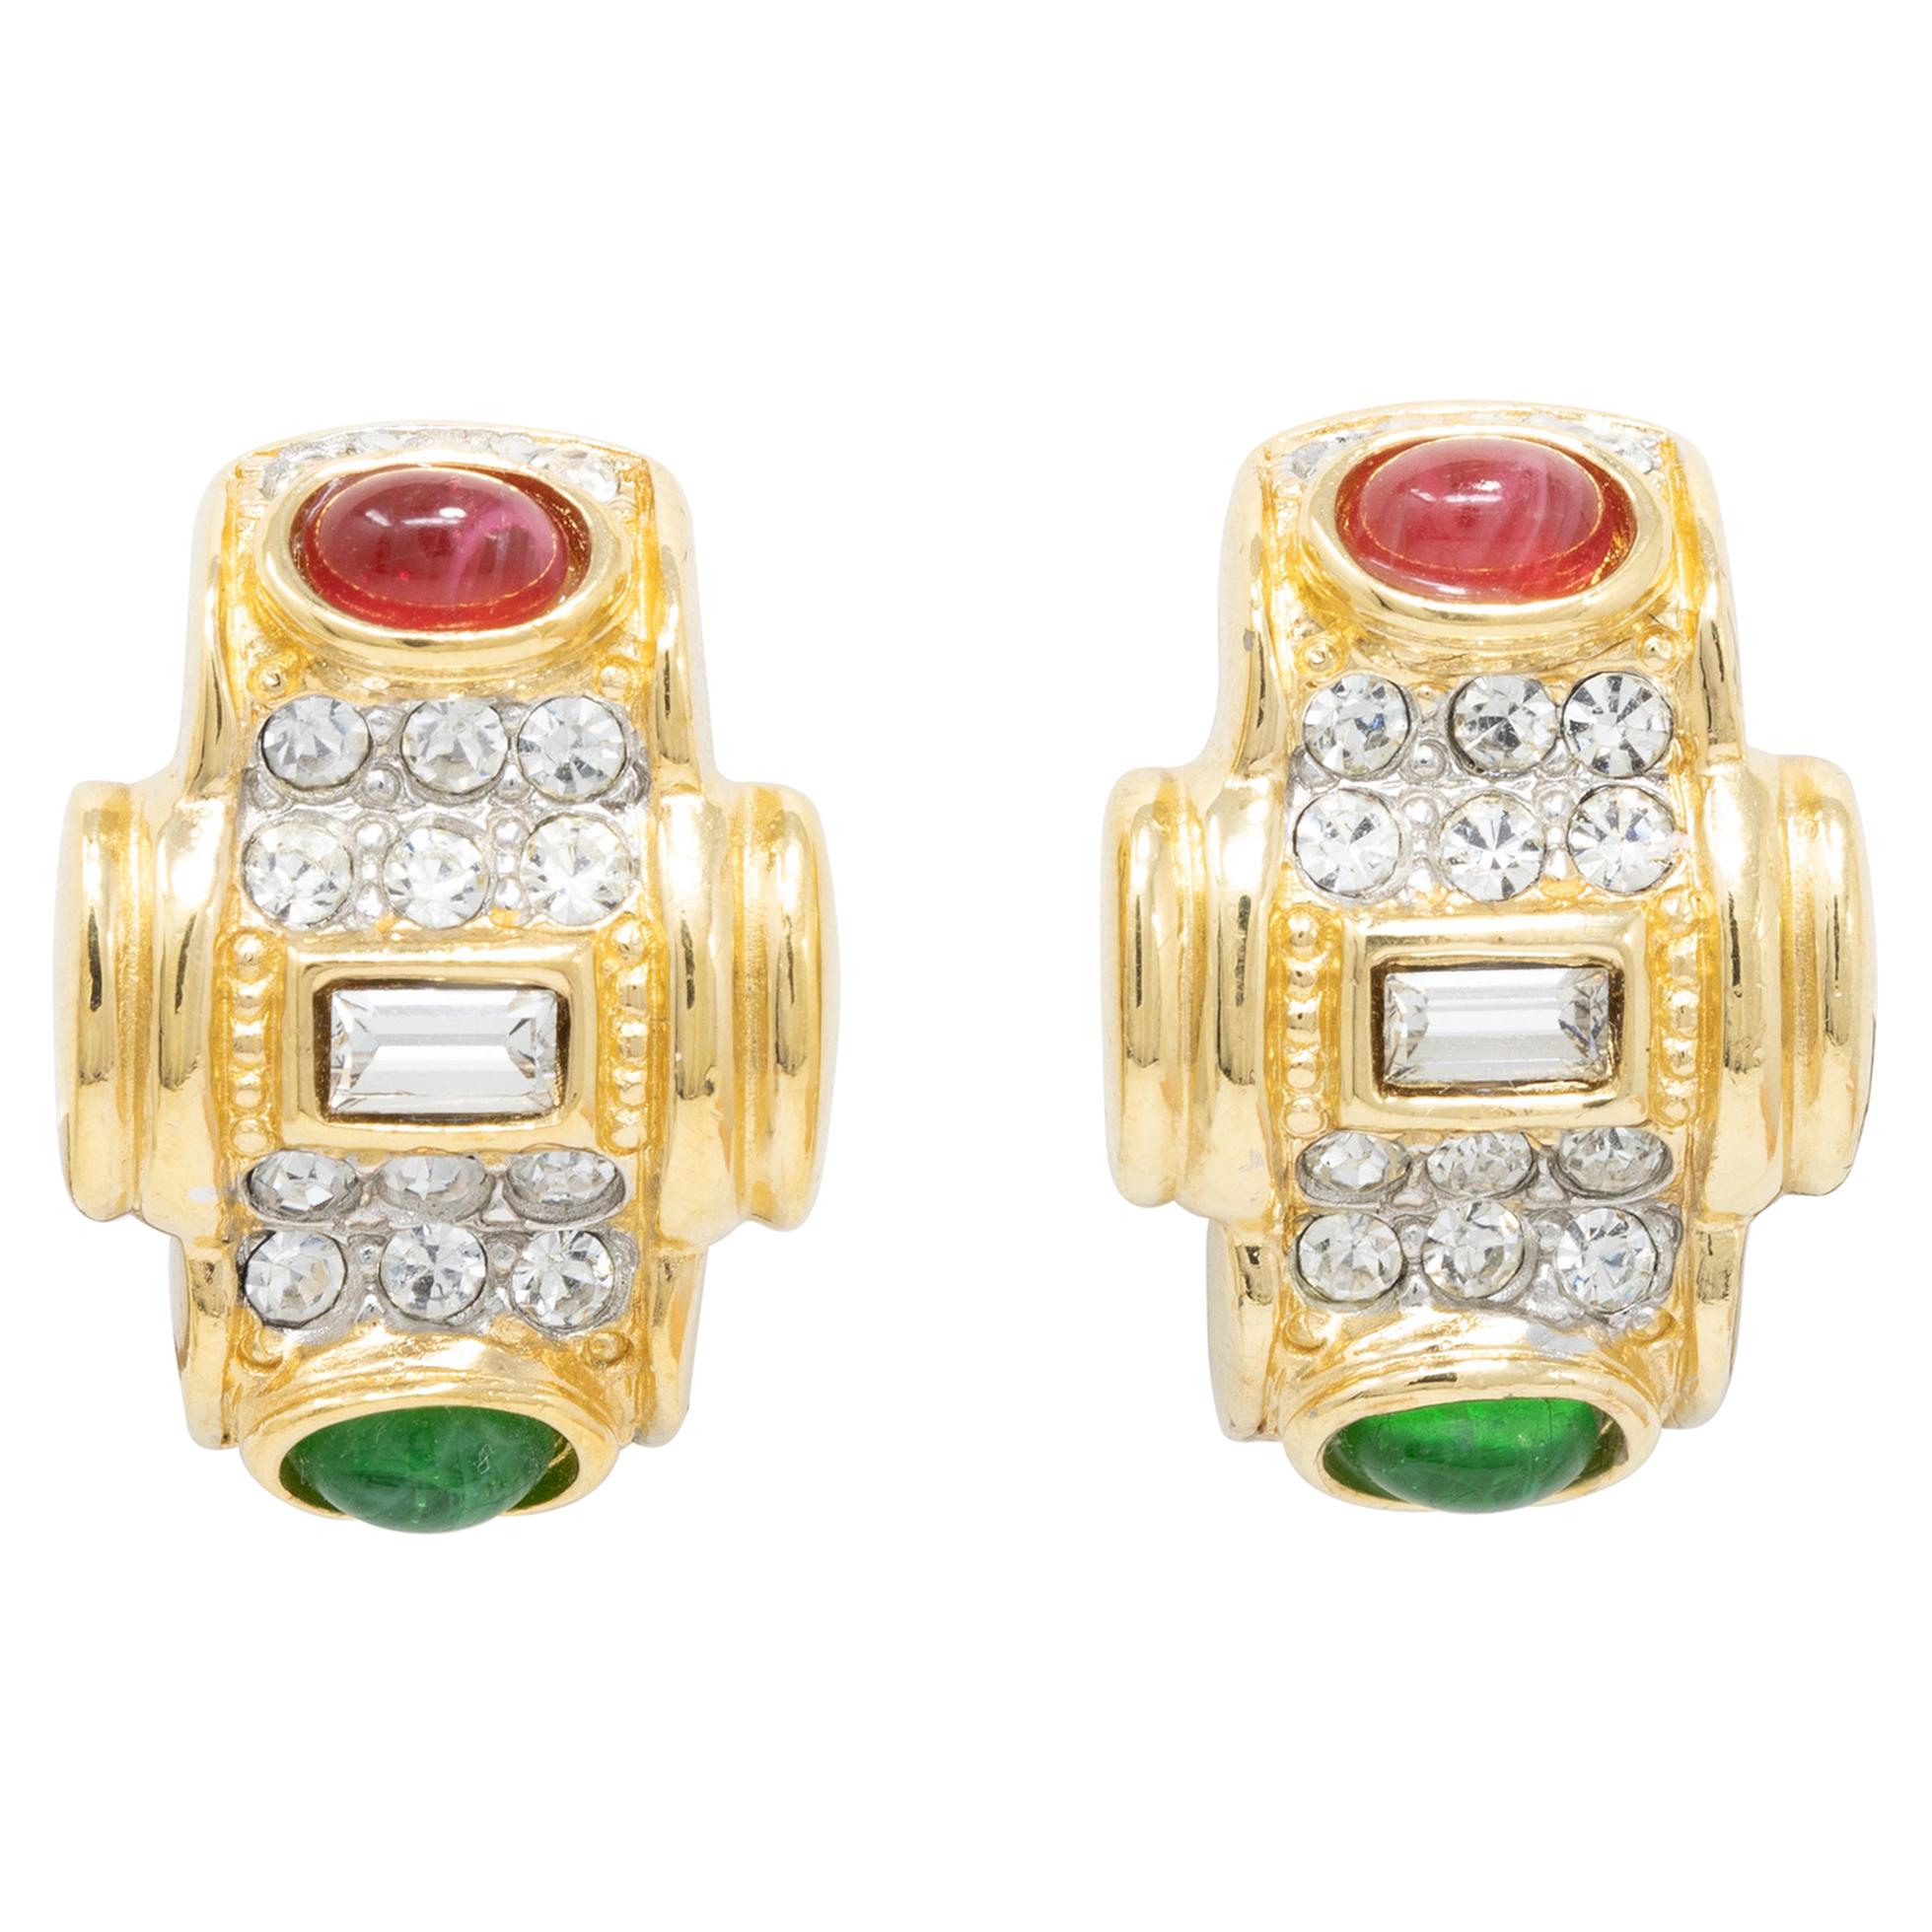 Gold Tone Deco-Style Red and Green Cabochon Retro Clips On Earrings, Mid 1900s